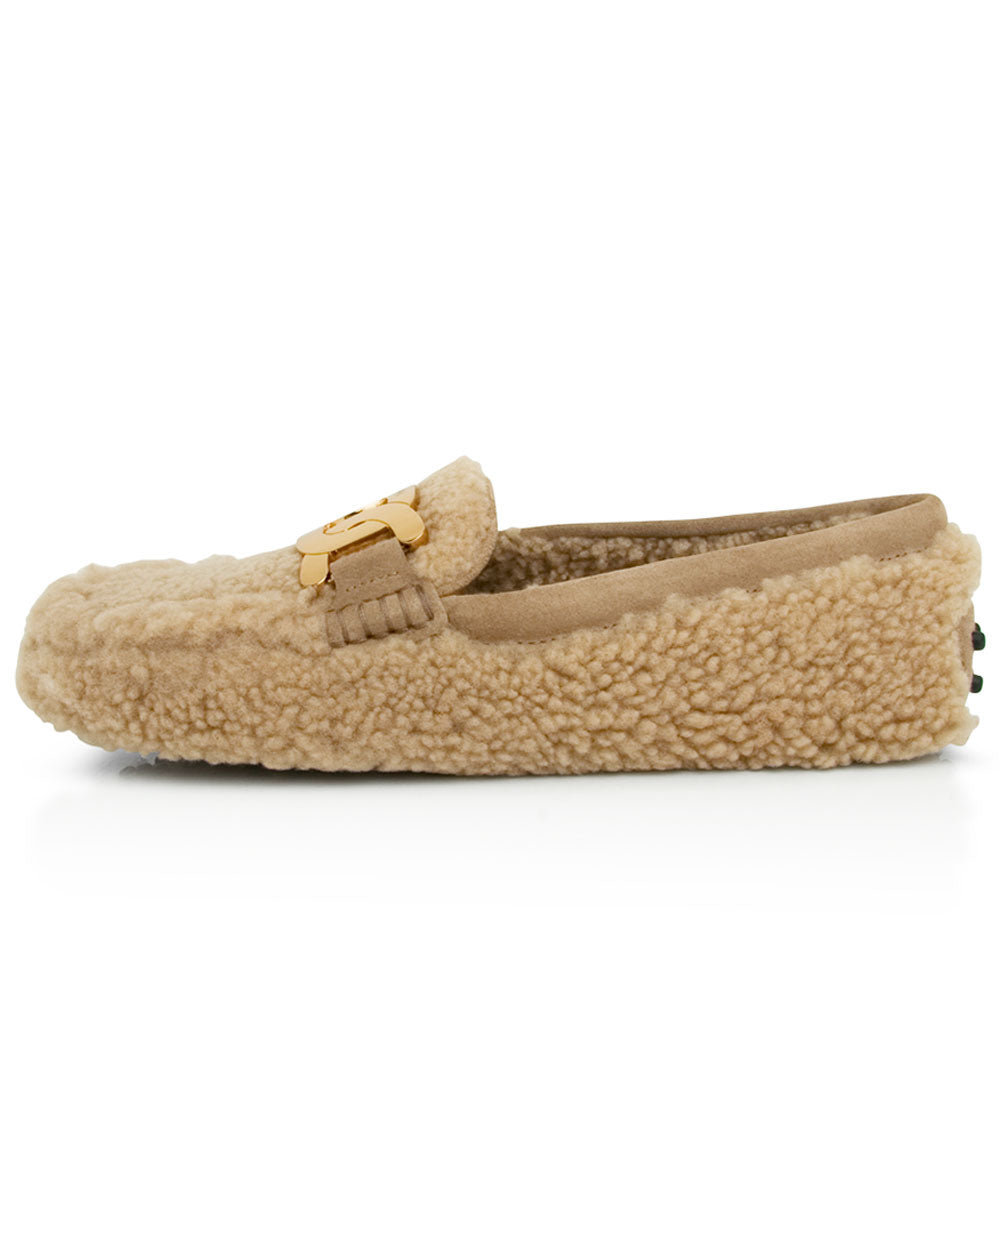 Gommino Shearling Loafer in Teddy